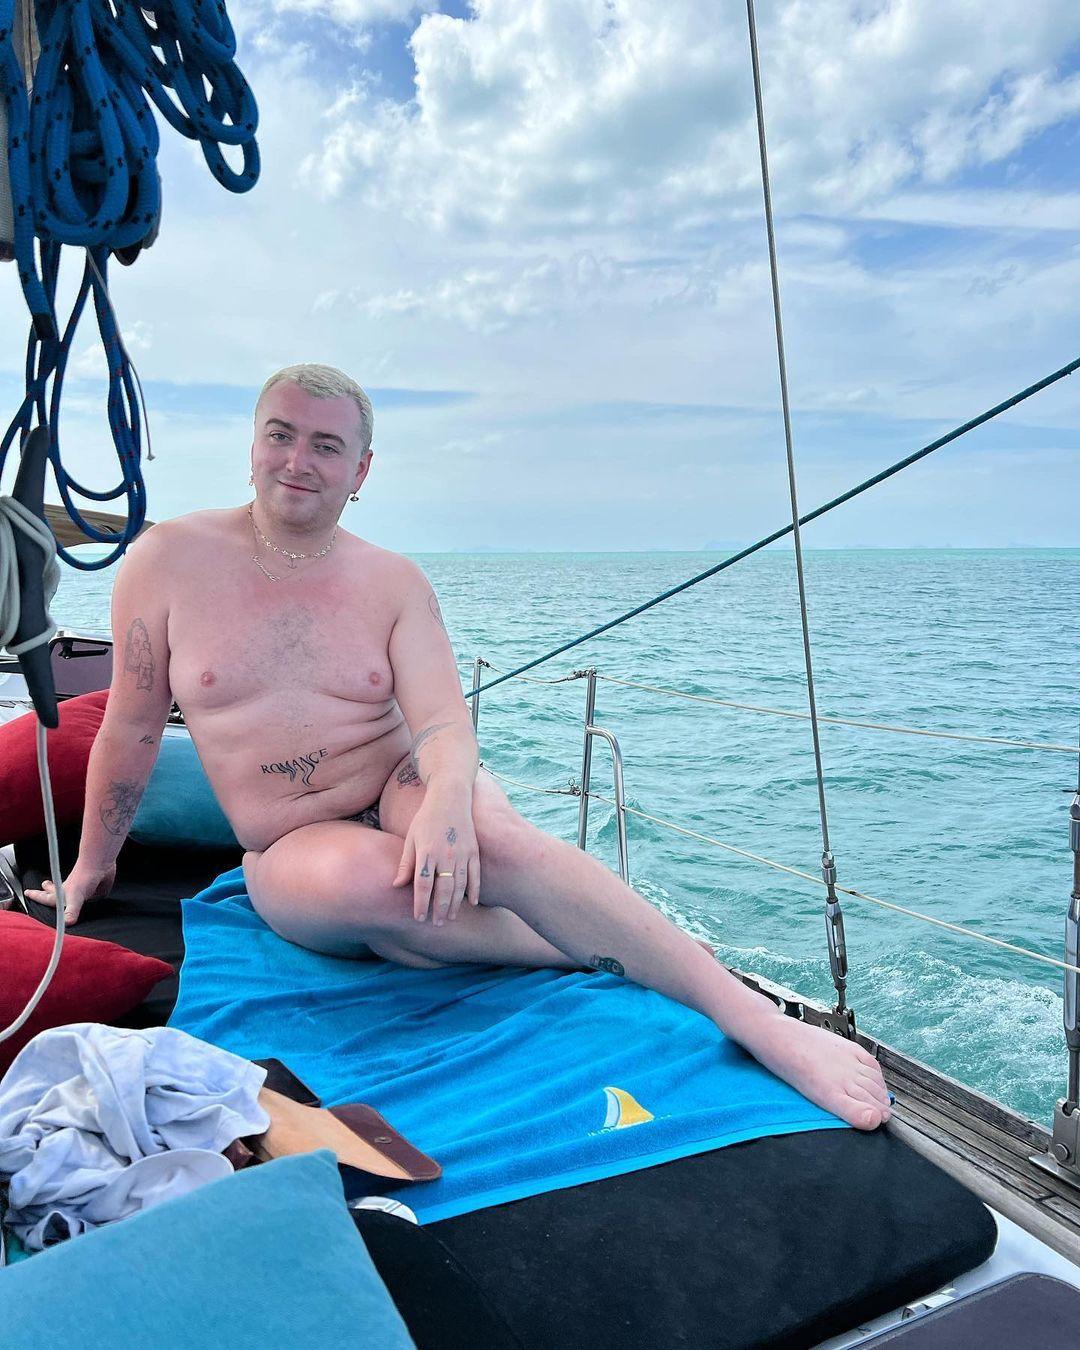 Sam Smith Slammed On IG For Living It Up On A Boat In A Leopard Speedo